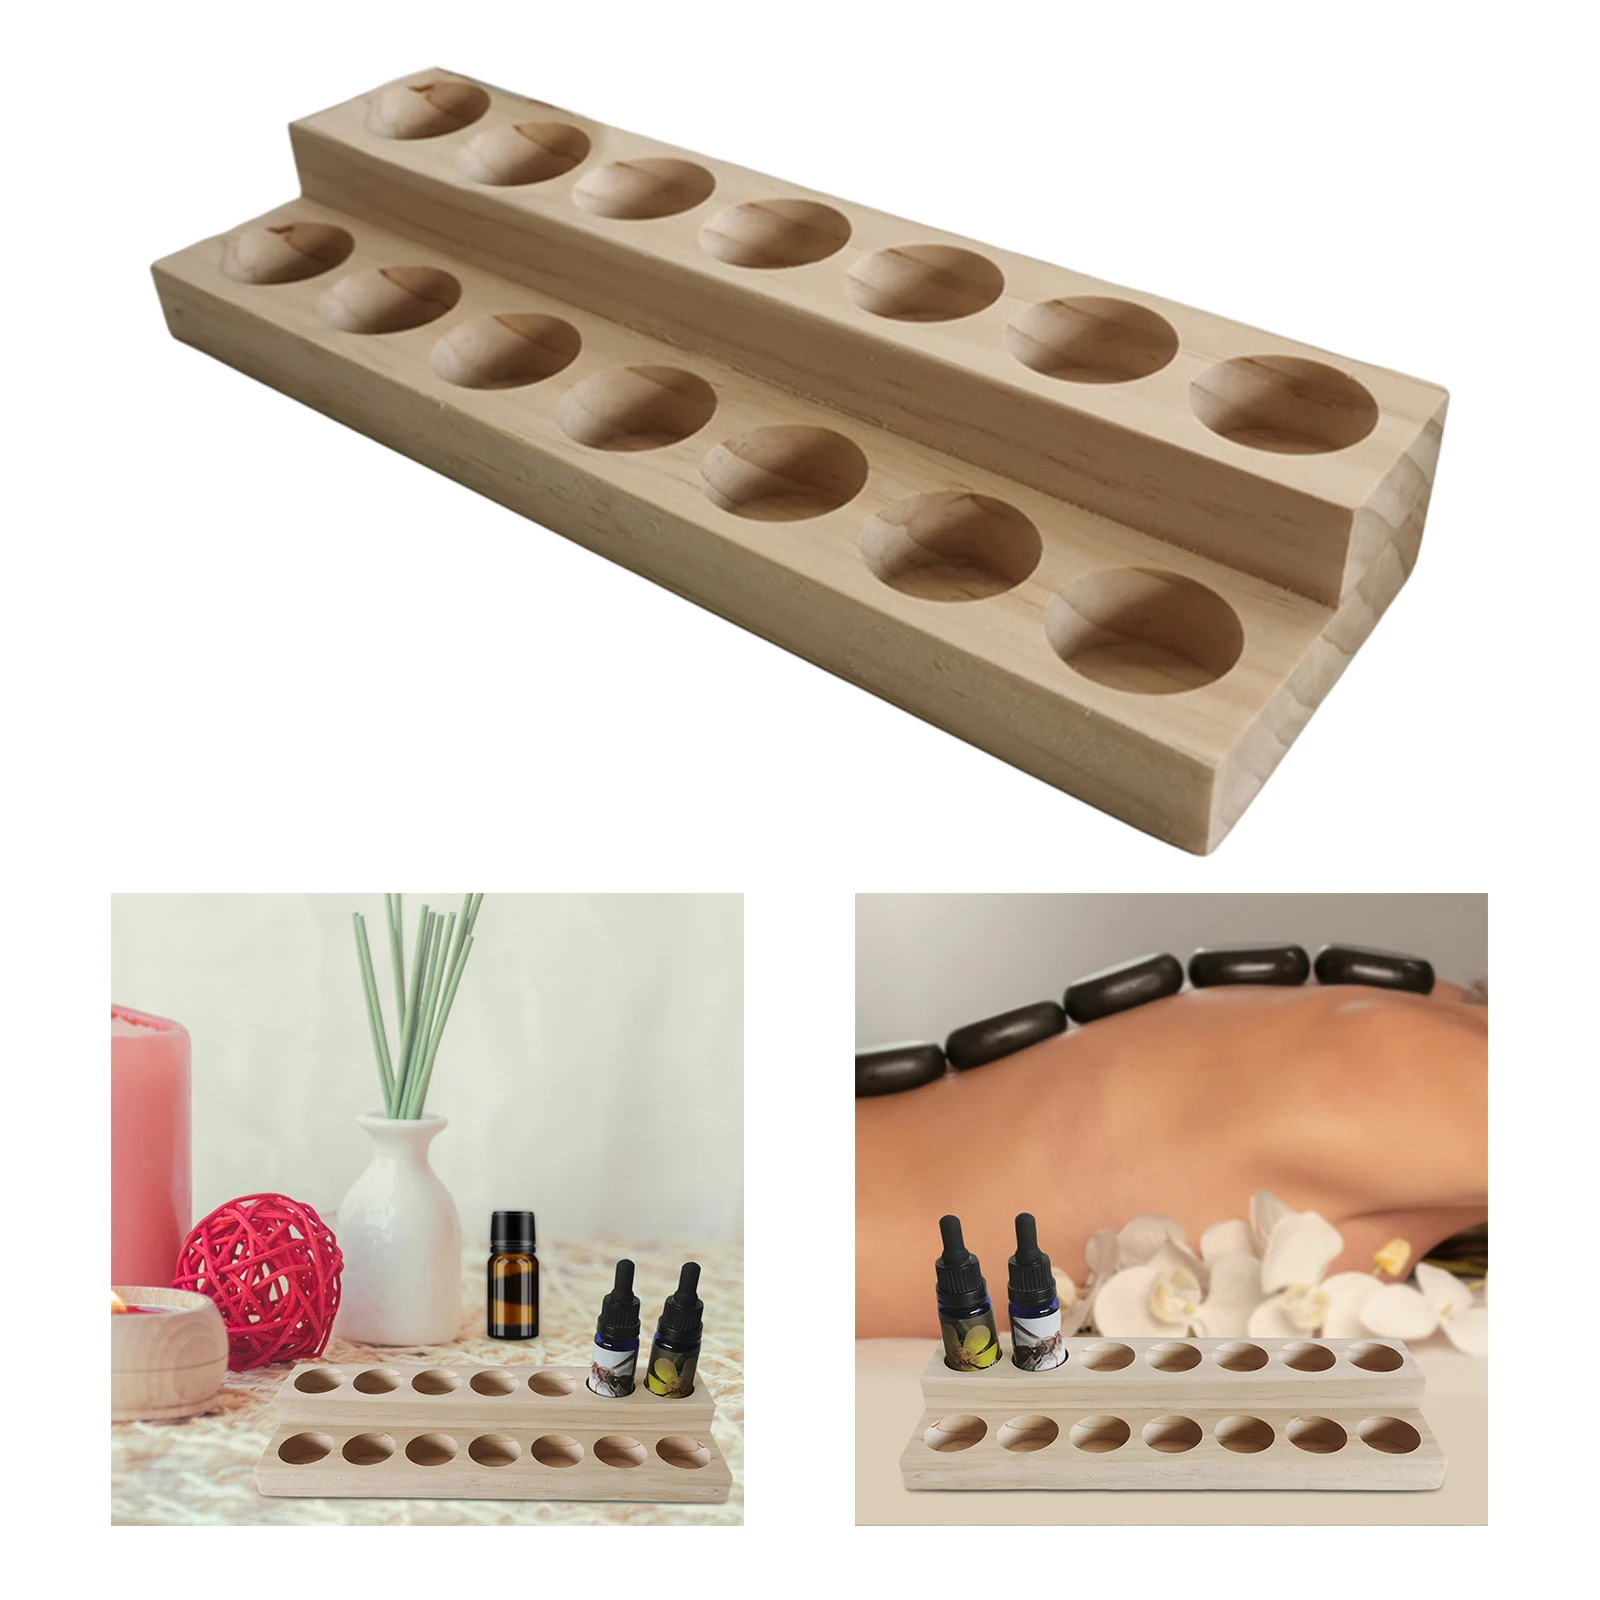 15ml Bottles Essential Oil Storage Rack Tray 2 Layers Case Display Stand Holder for Perfume Ornaments Beauty Salons Tabletop